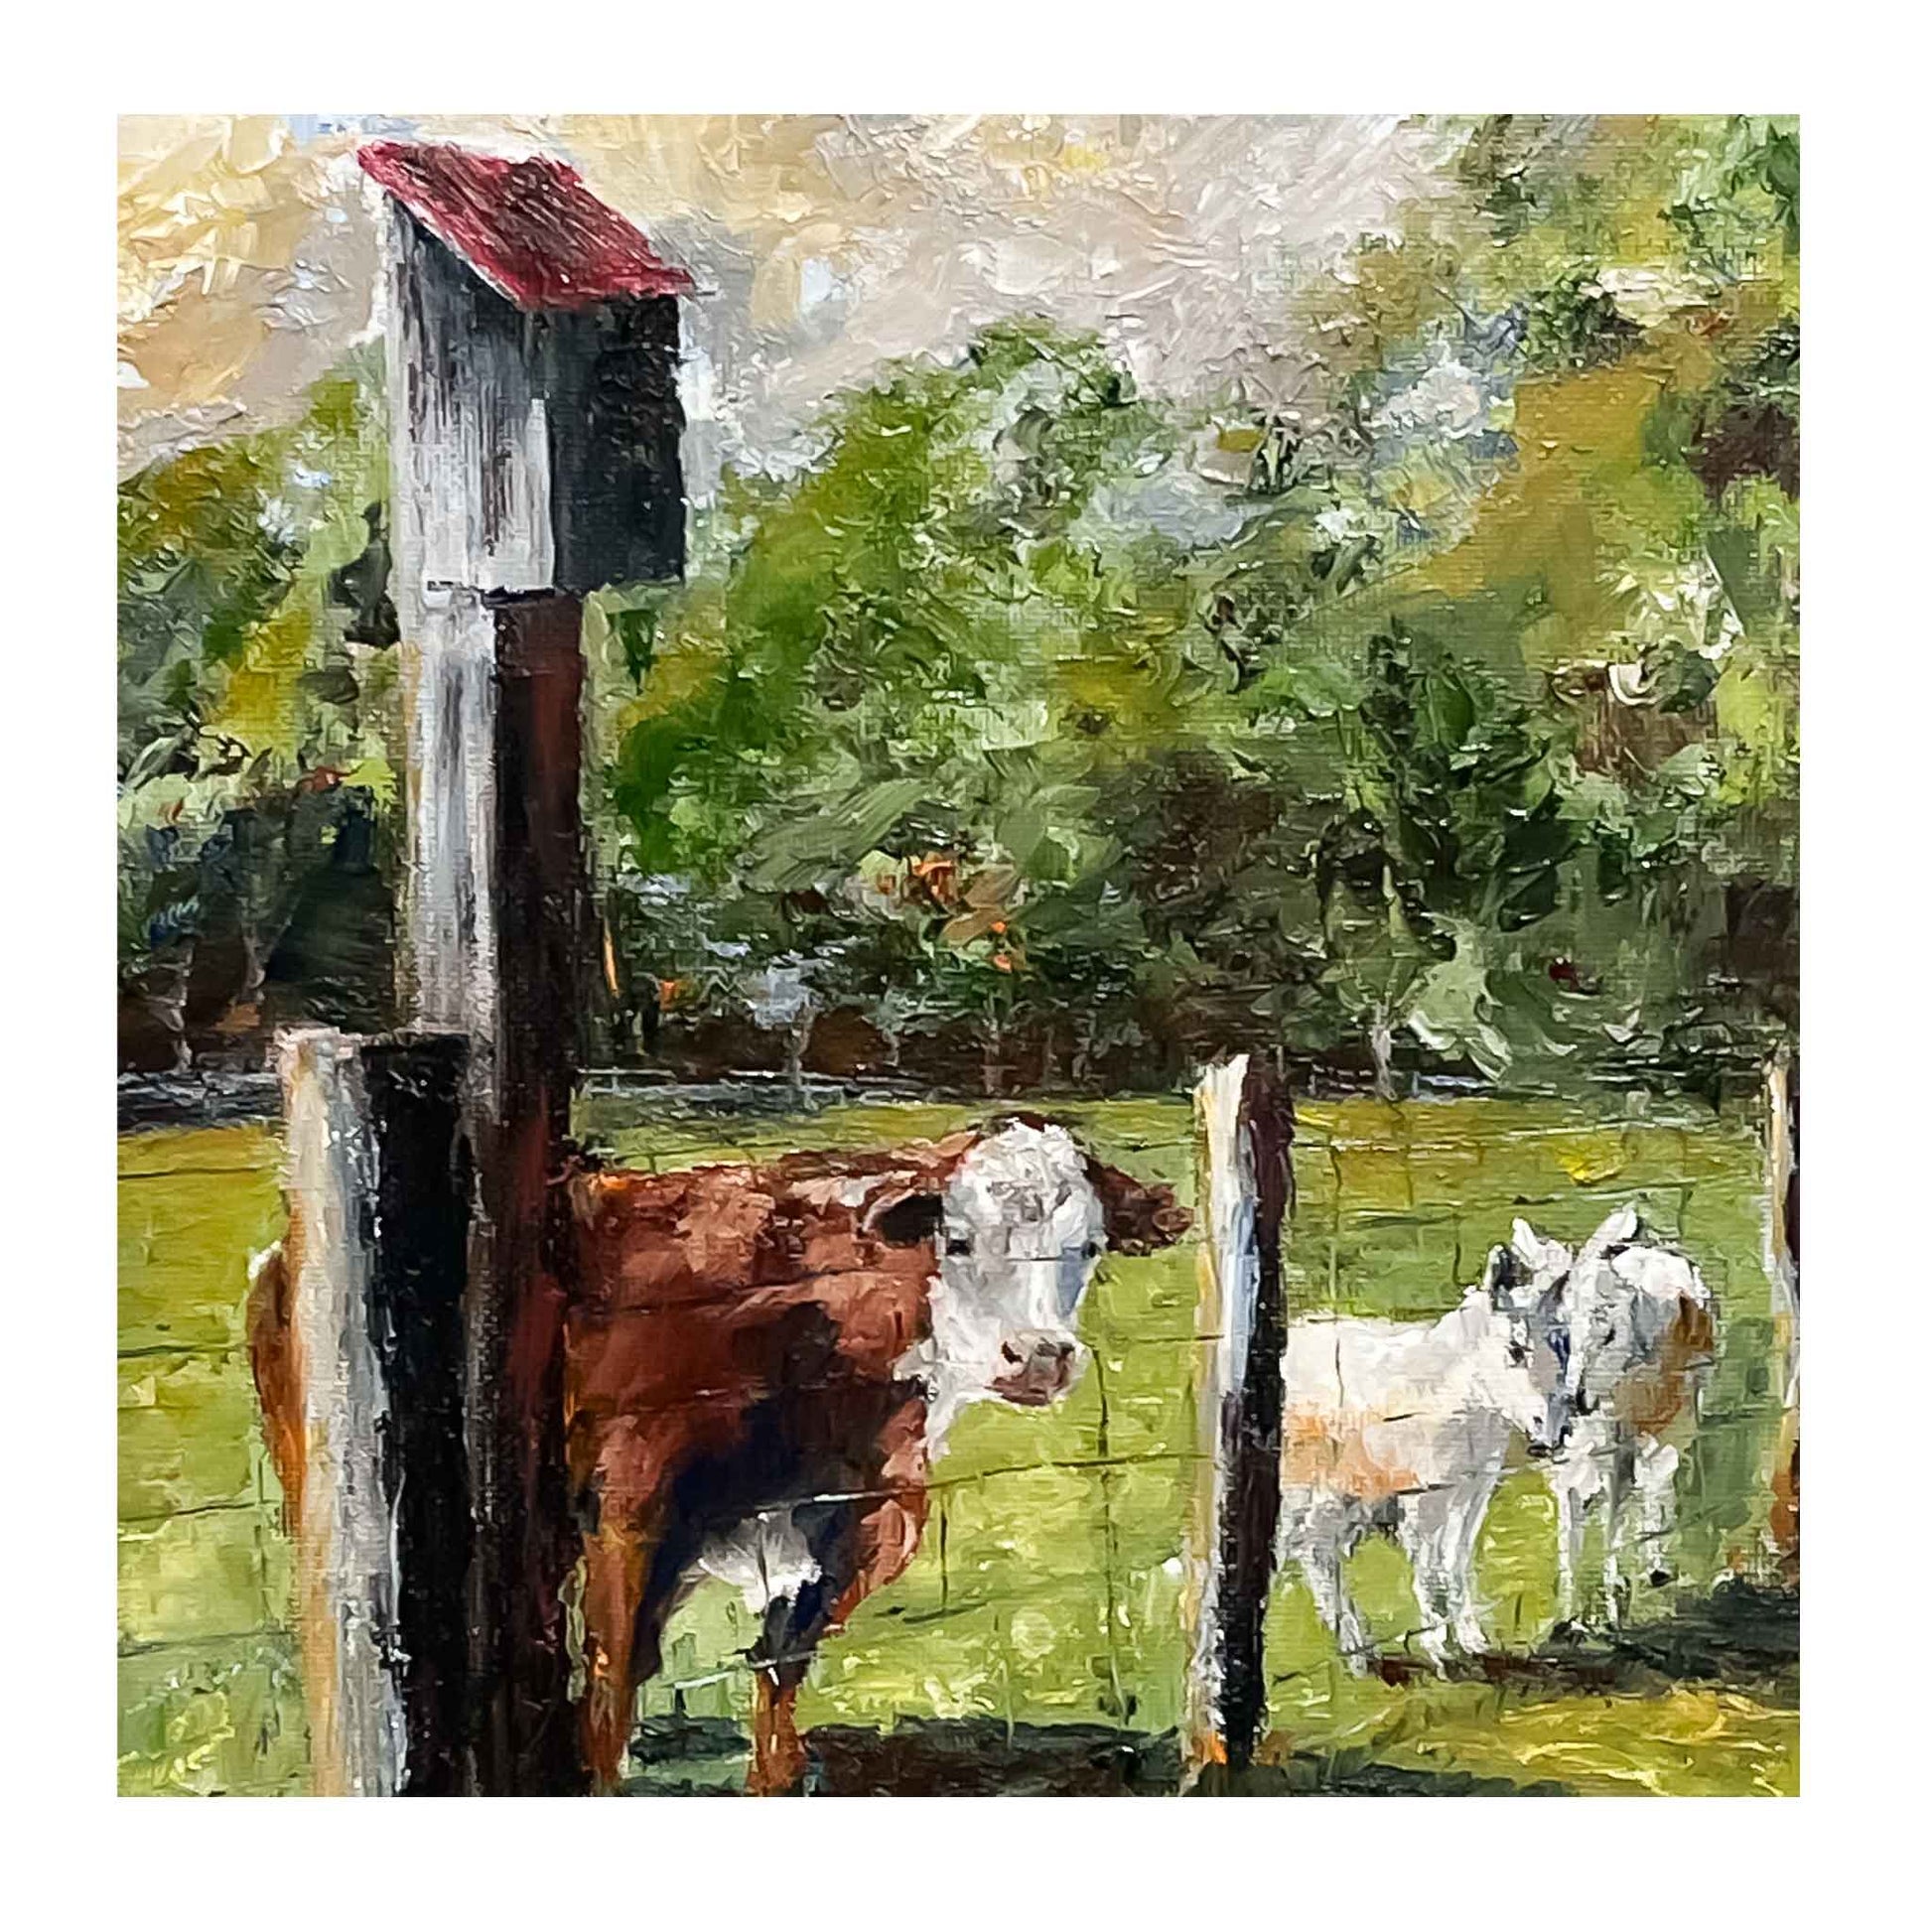 RO Friends at the Fence Original Oil Painting by Artist Becky Owen. Green pastures and majestic trees serve as a backdrop to this charming country scene. A brown and white cow and two tiny donkeys wait by the fence beneath a wooden bird house. They appear to be waiting expectantly. The pastel blue sky features building clouds. Framed in a rustic wooden frame and ready to hang. Measures 12 " x 15".